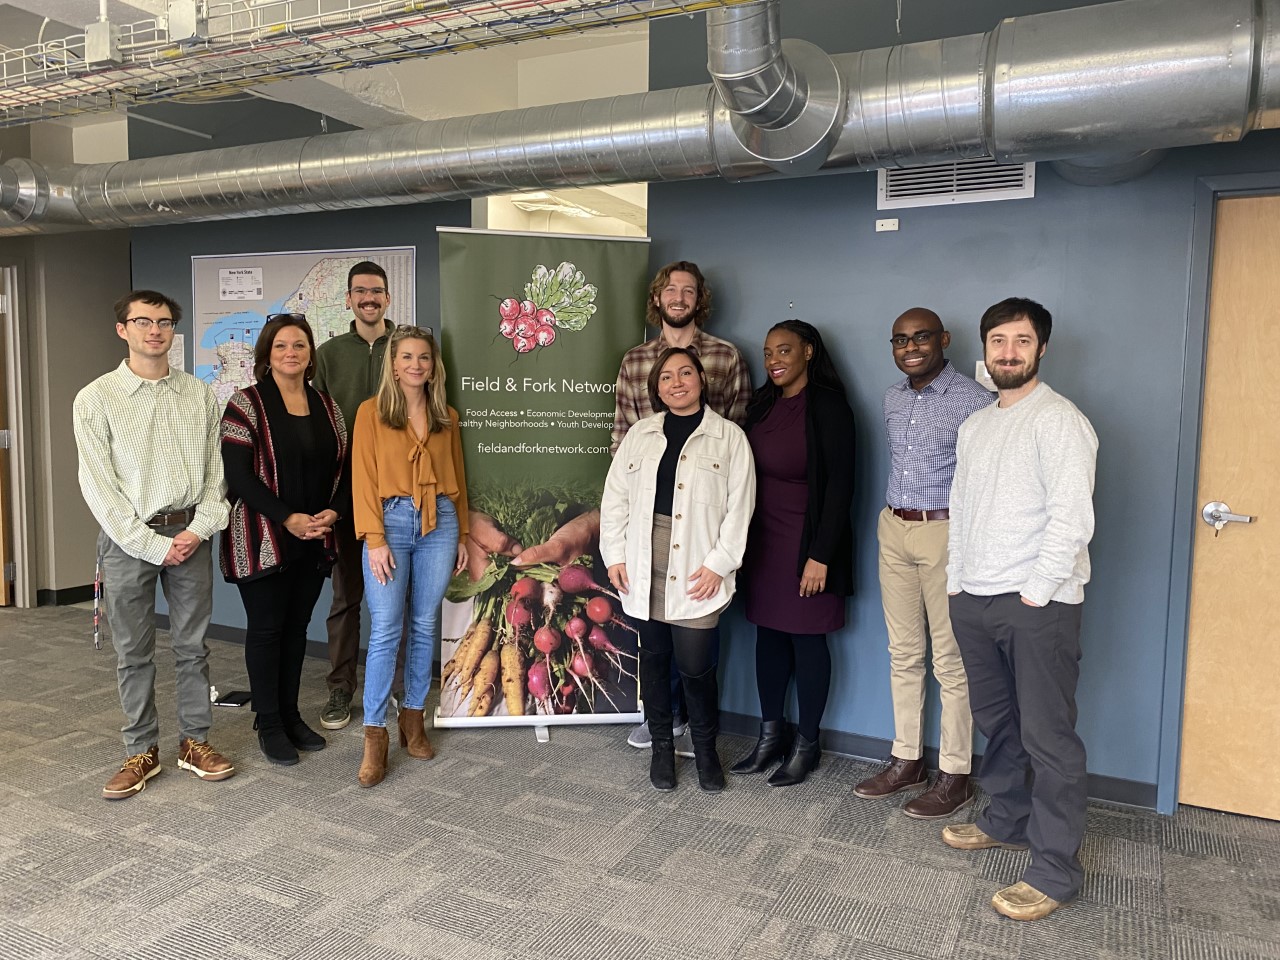 The Action Research Collaborative at Cornell partners with Field & Fork Network to expand ‘Double Up’ nutrition incentive program across New York State